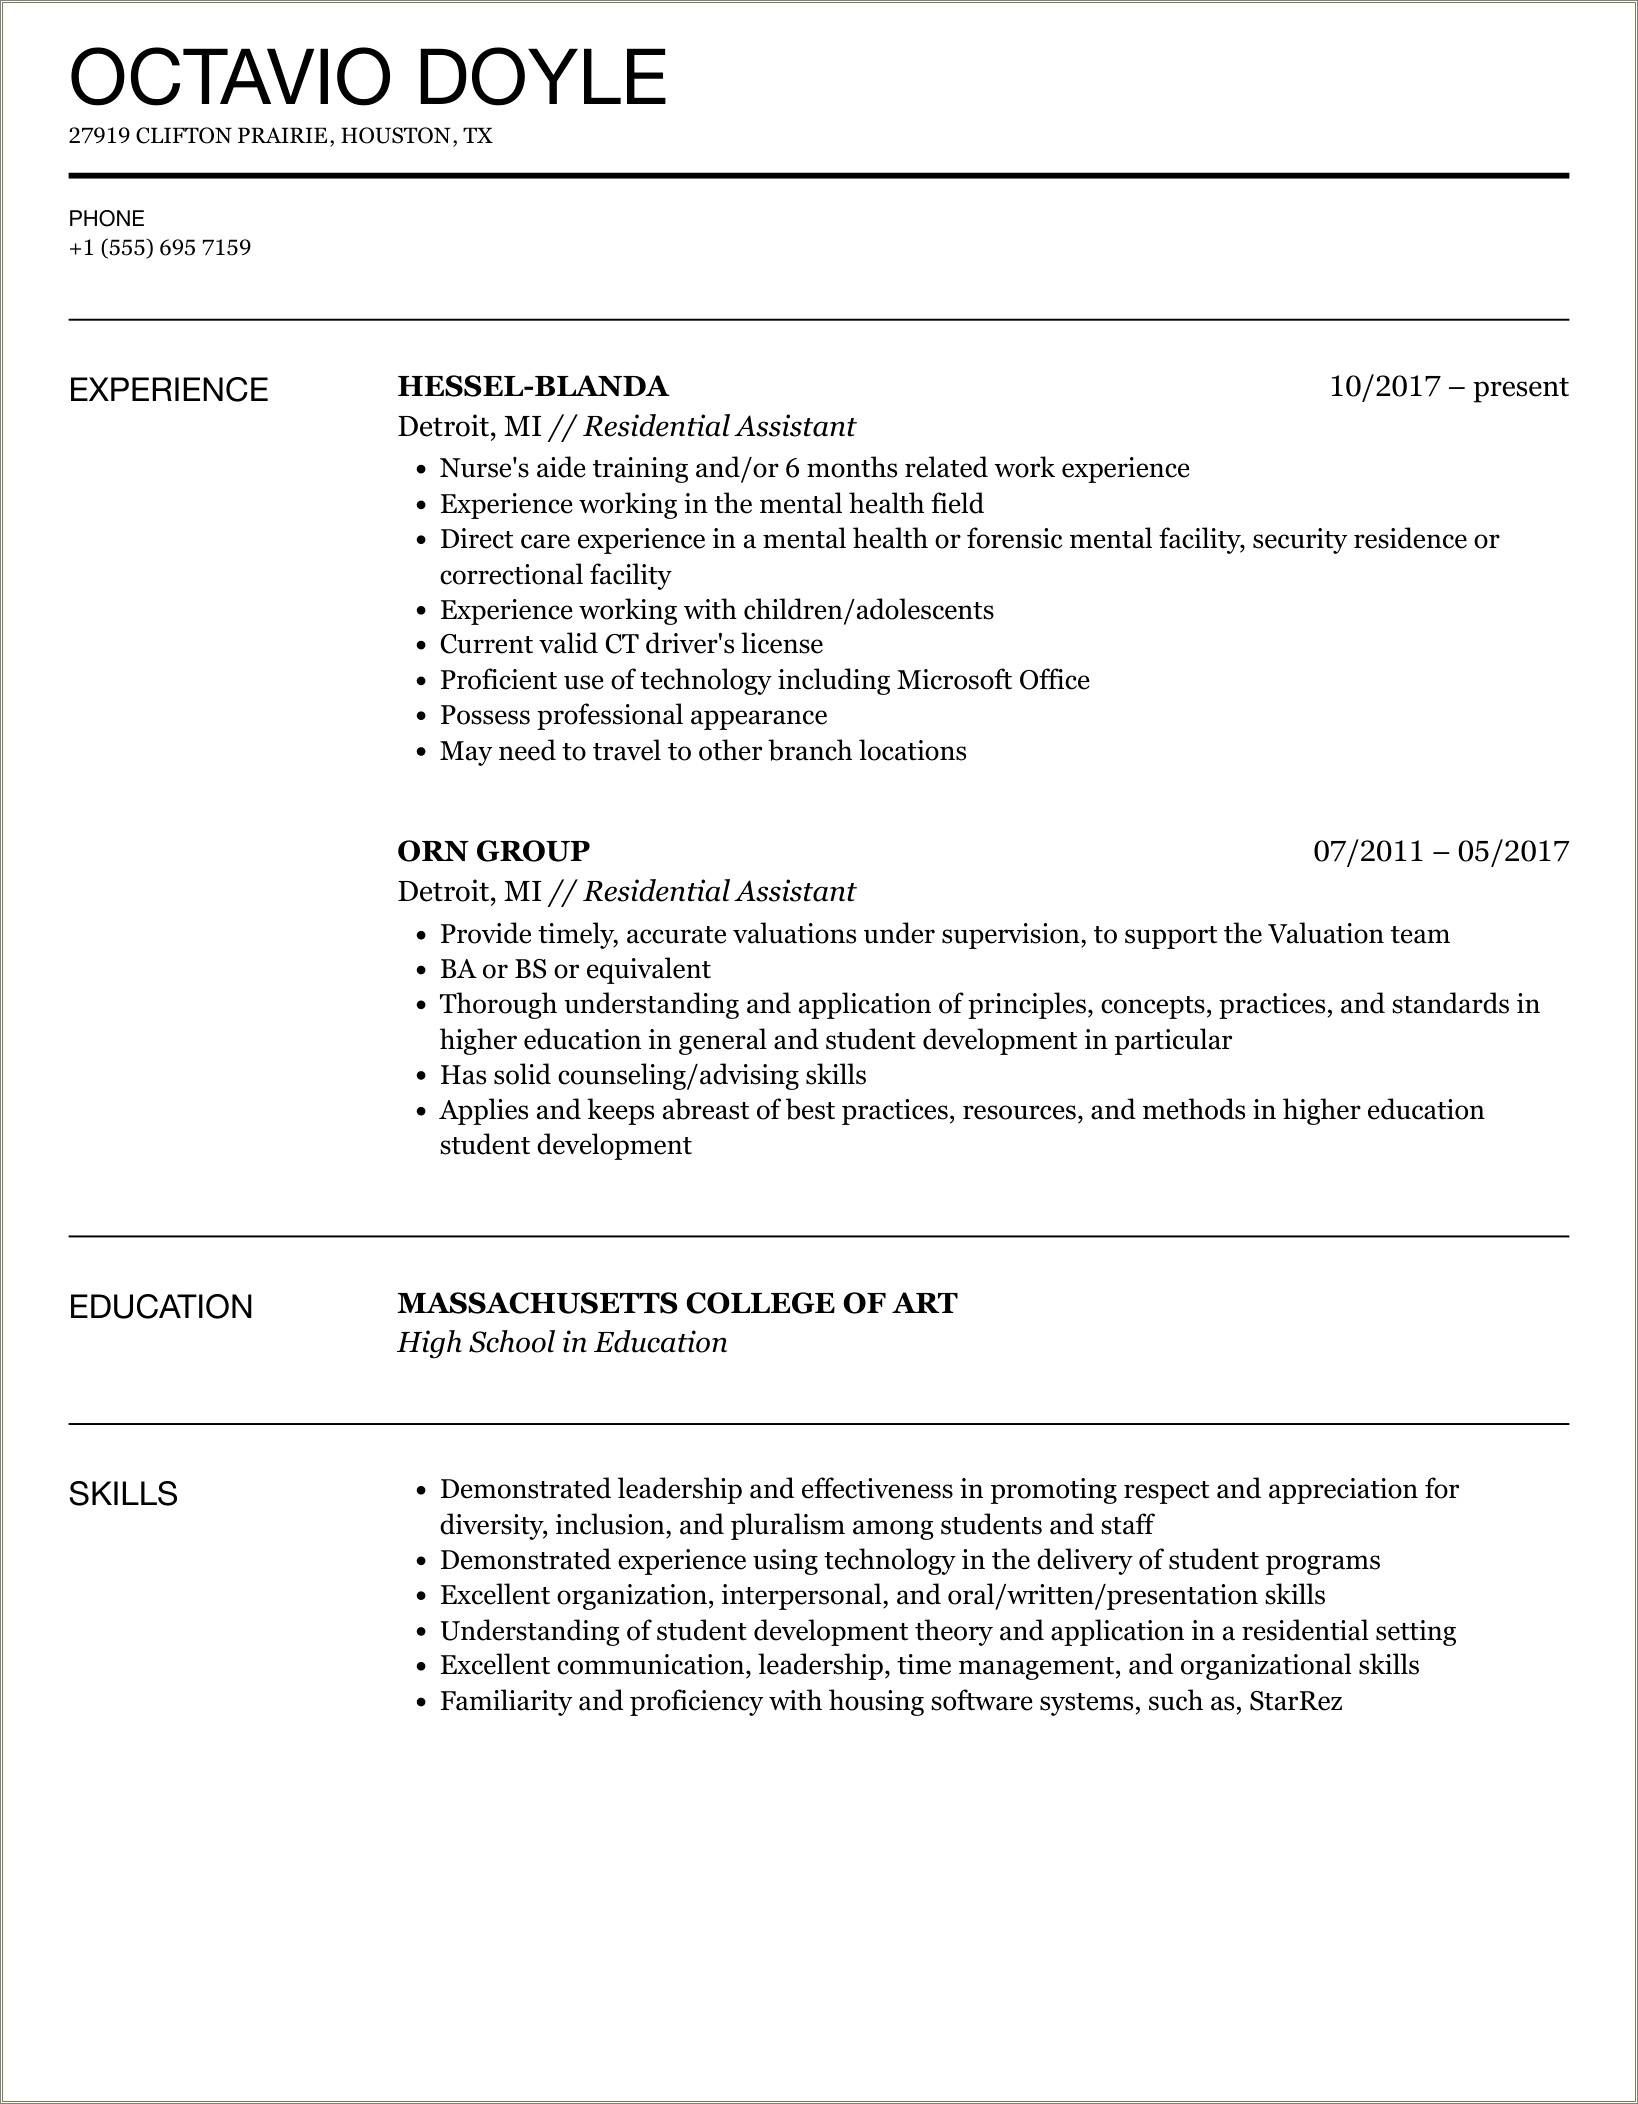 Resume Skills To Write For A Resident Assistant